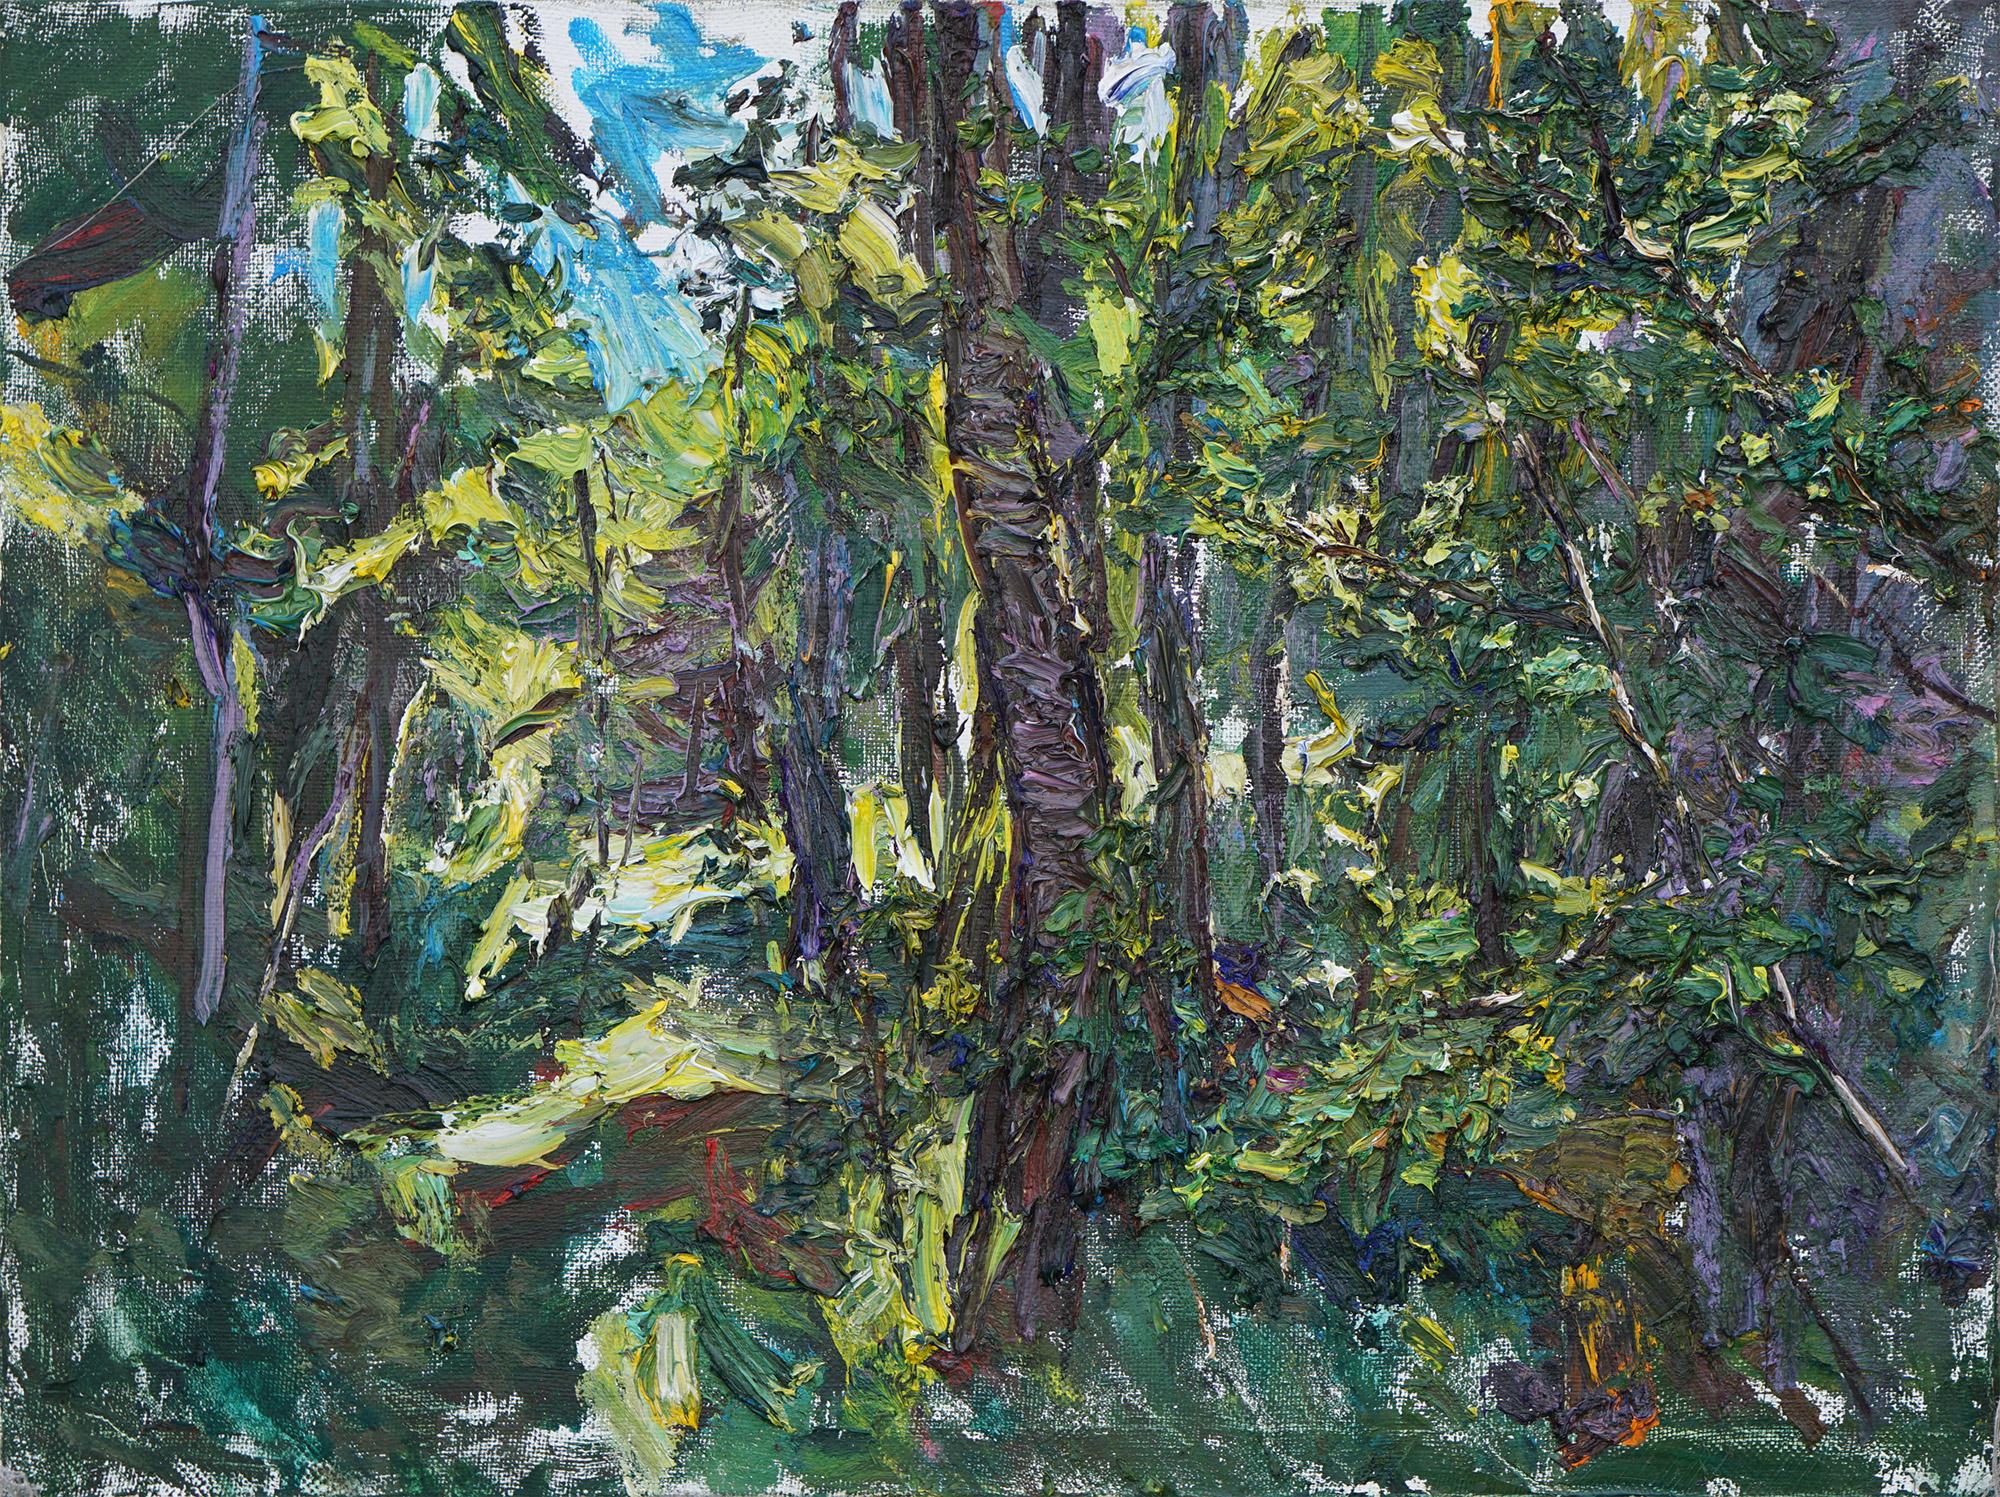 Ulrich Gleiter Landscape Painting - "Greens in a Forest" Oil Painting